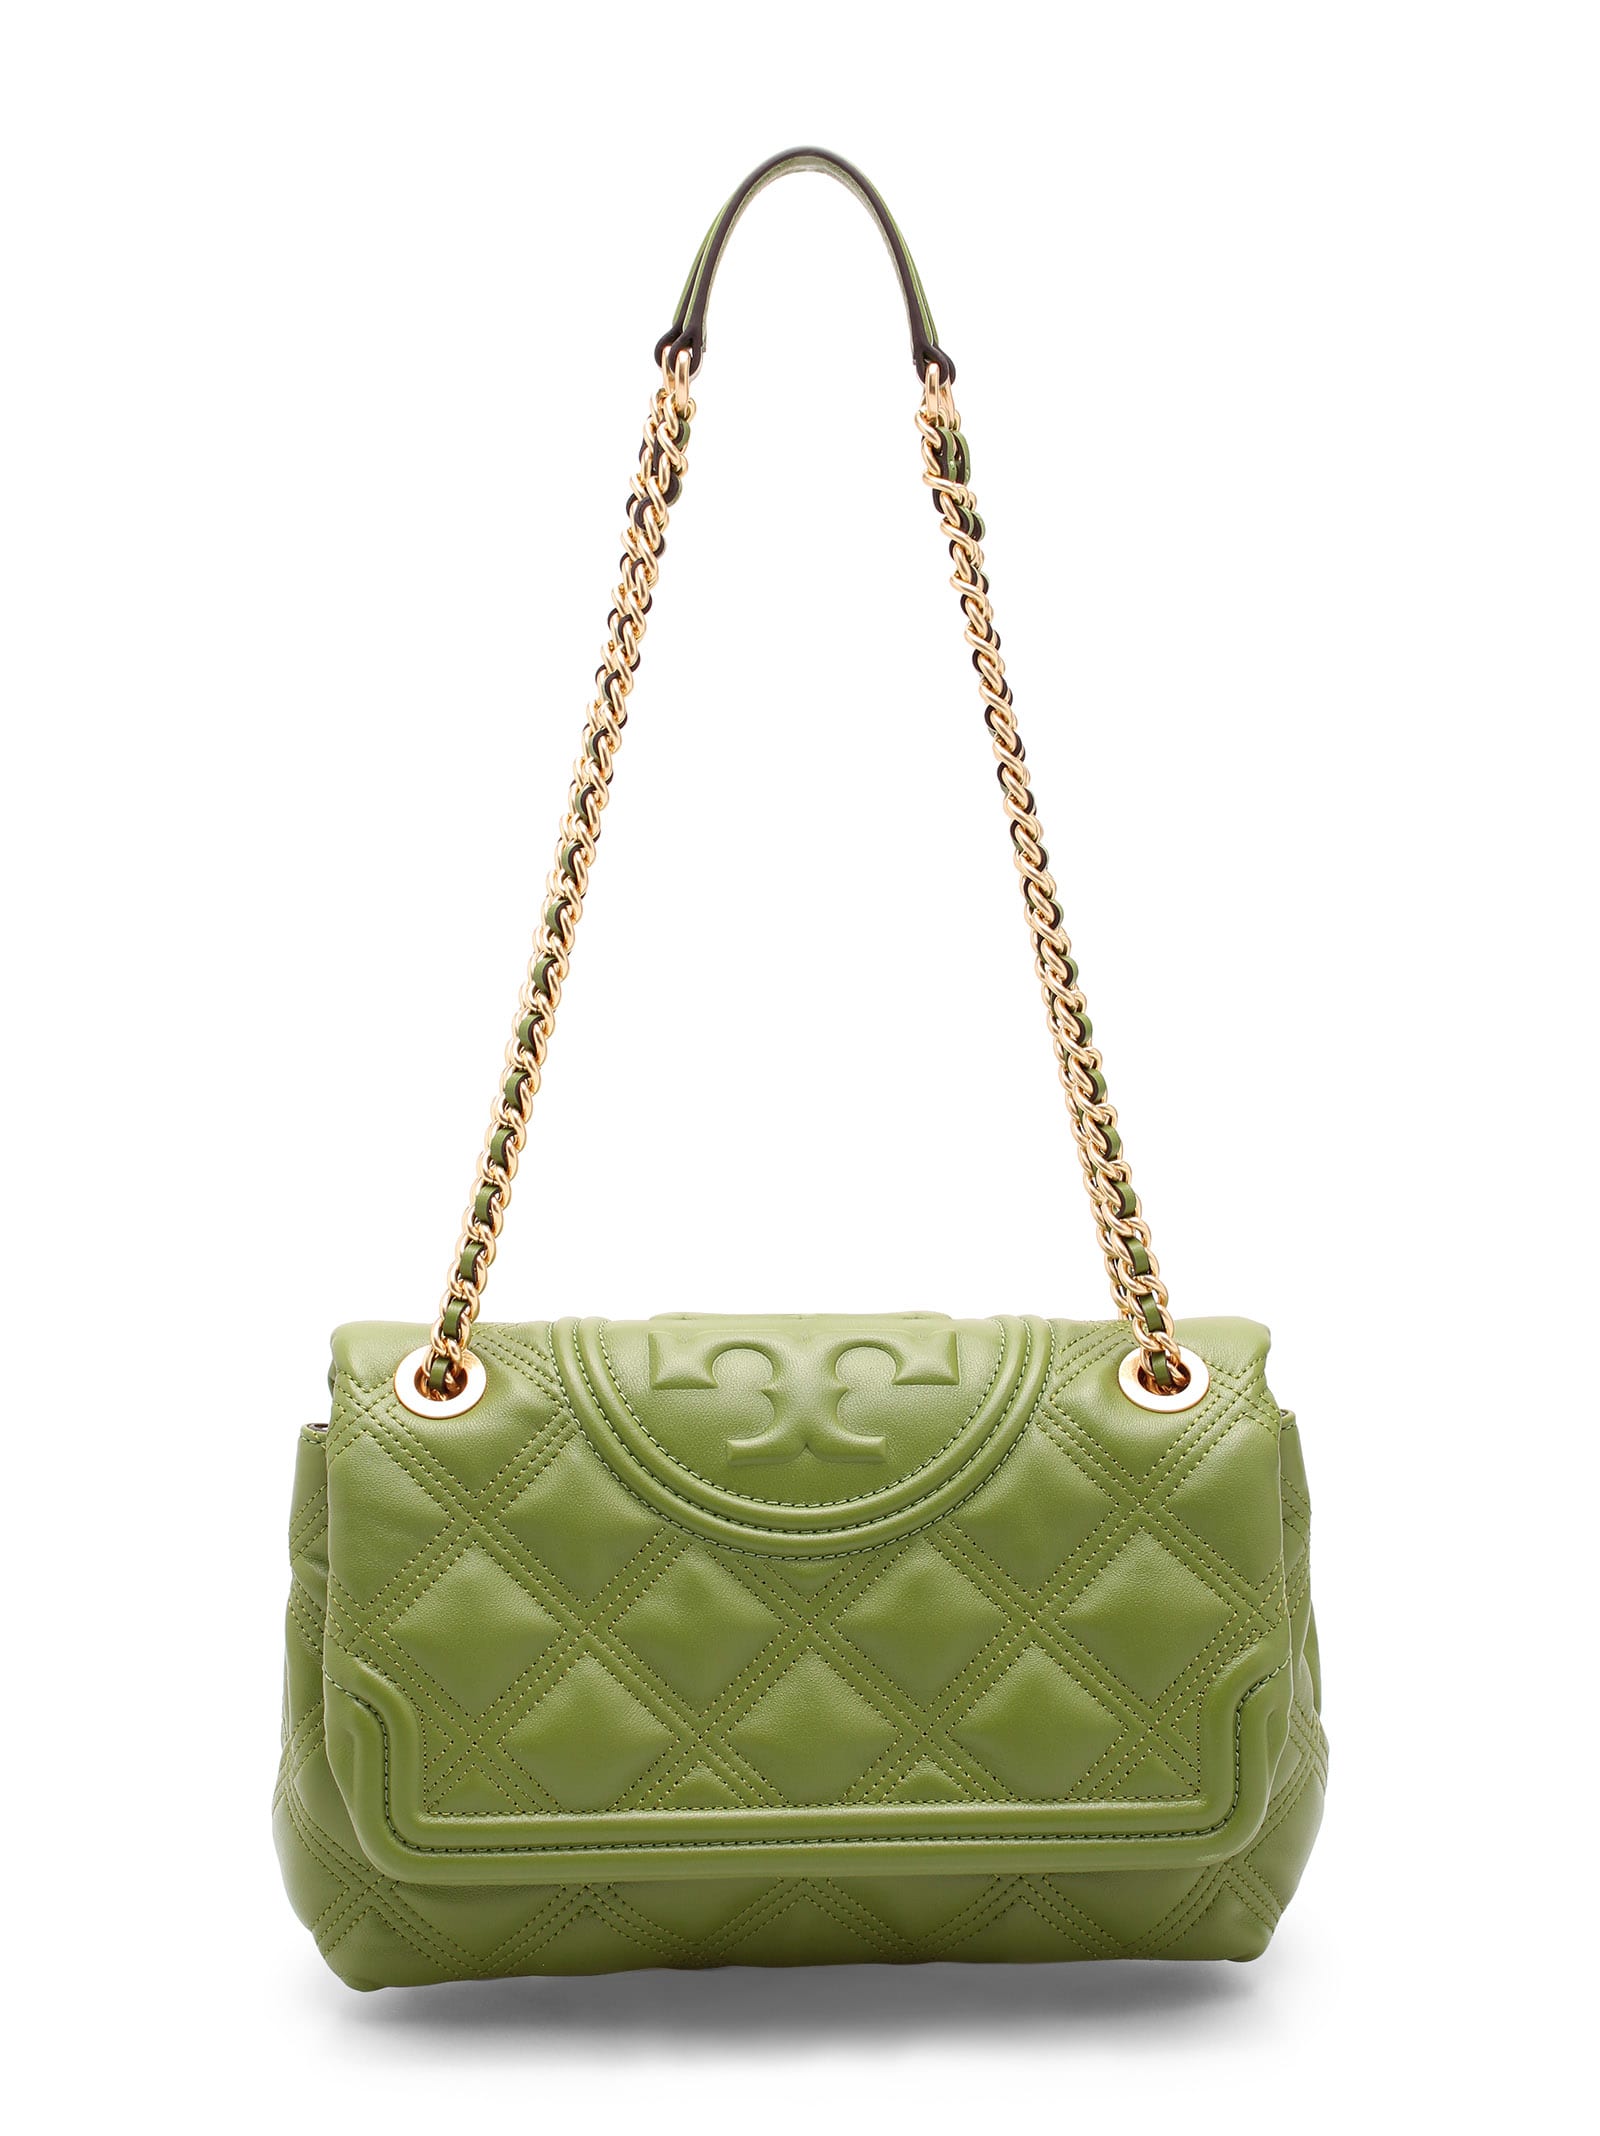 Tory Burch Fleming Leather Shoulder Bag In Green